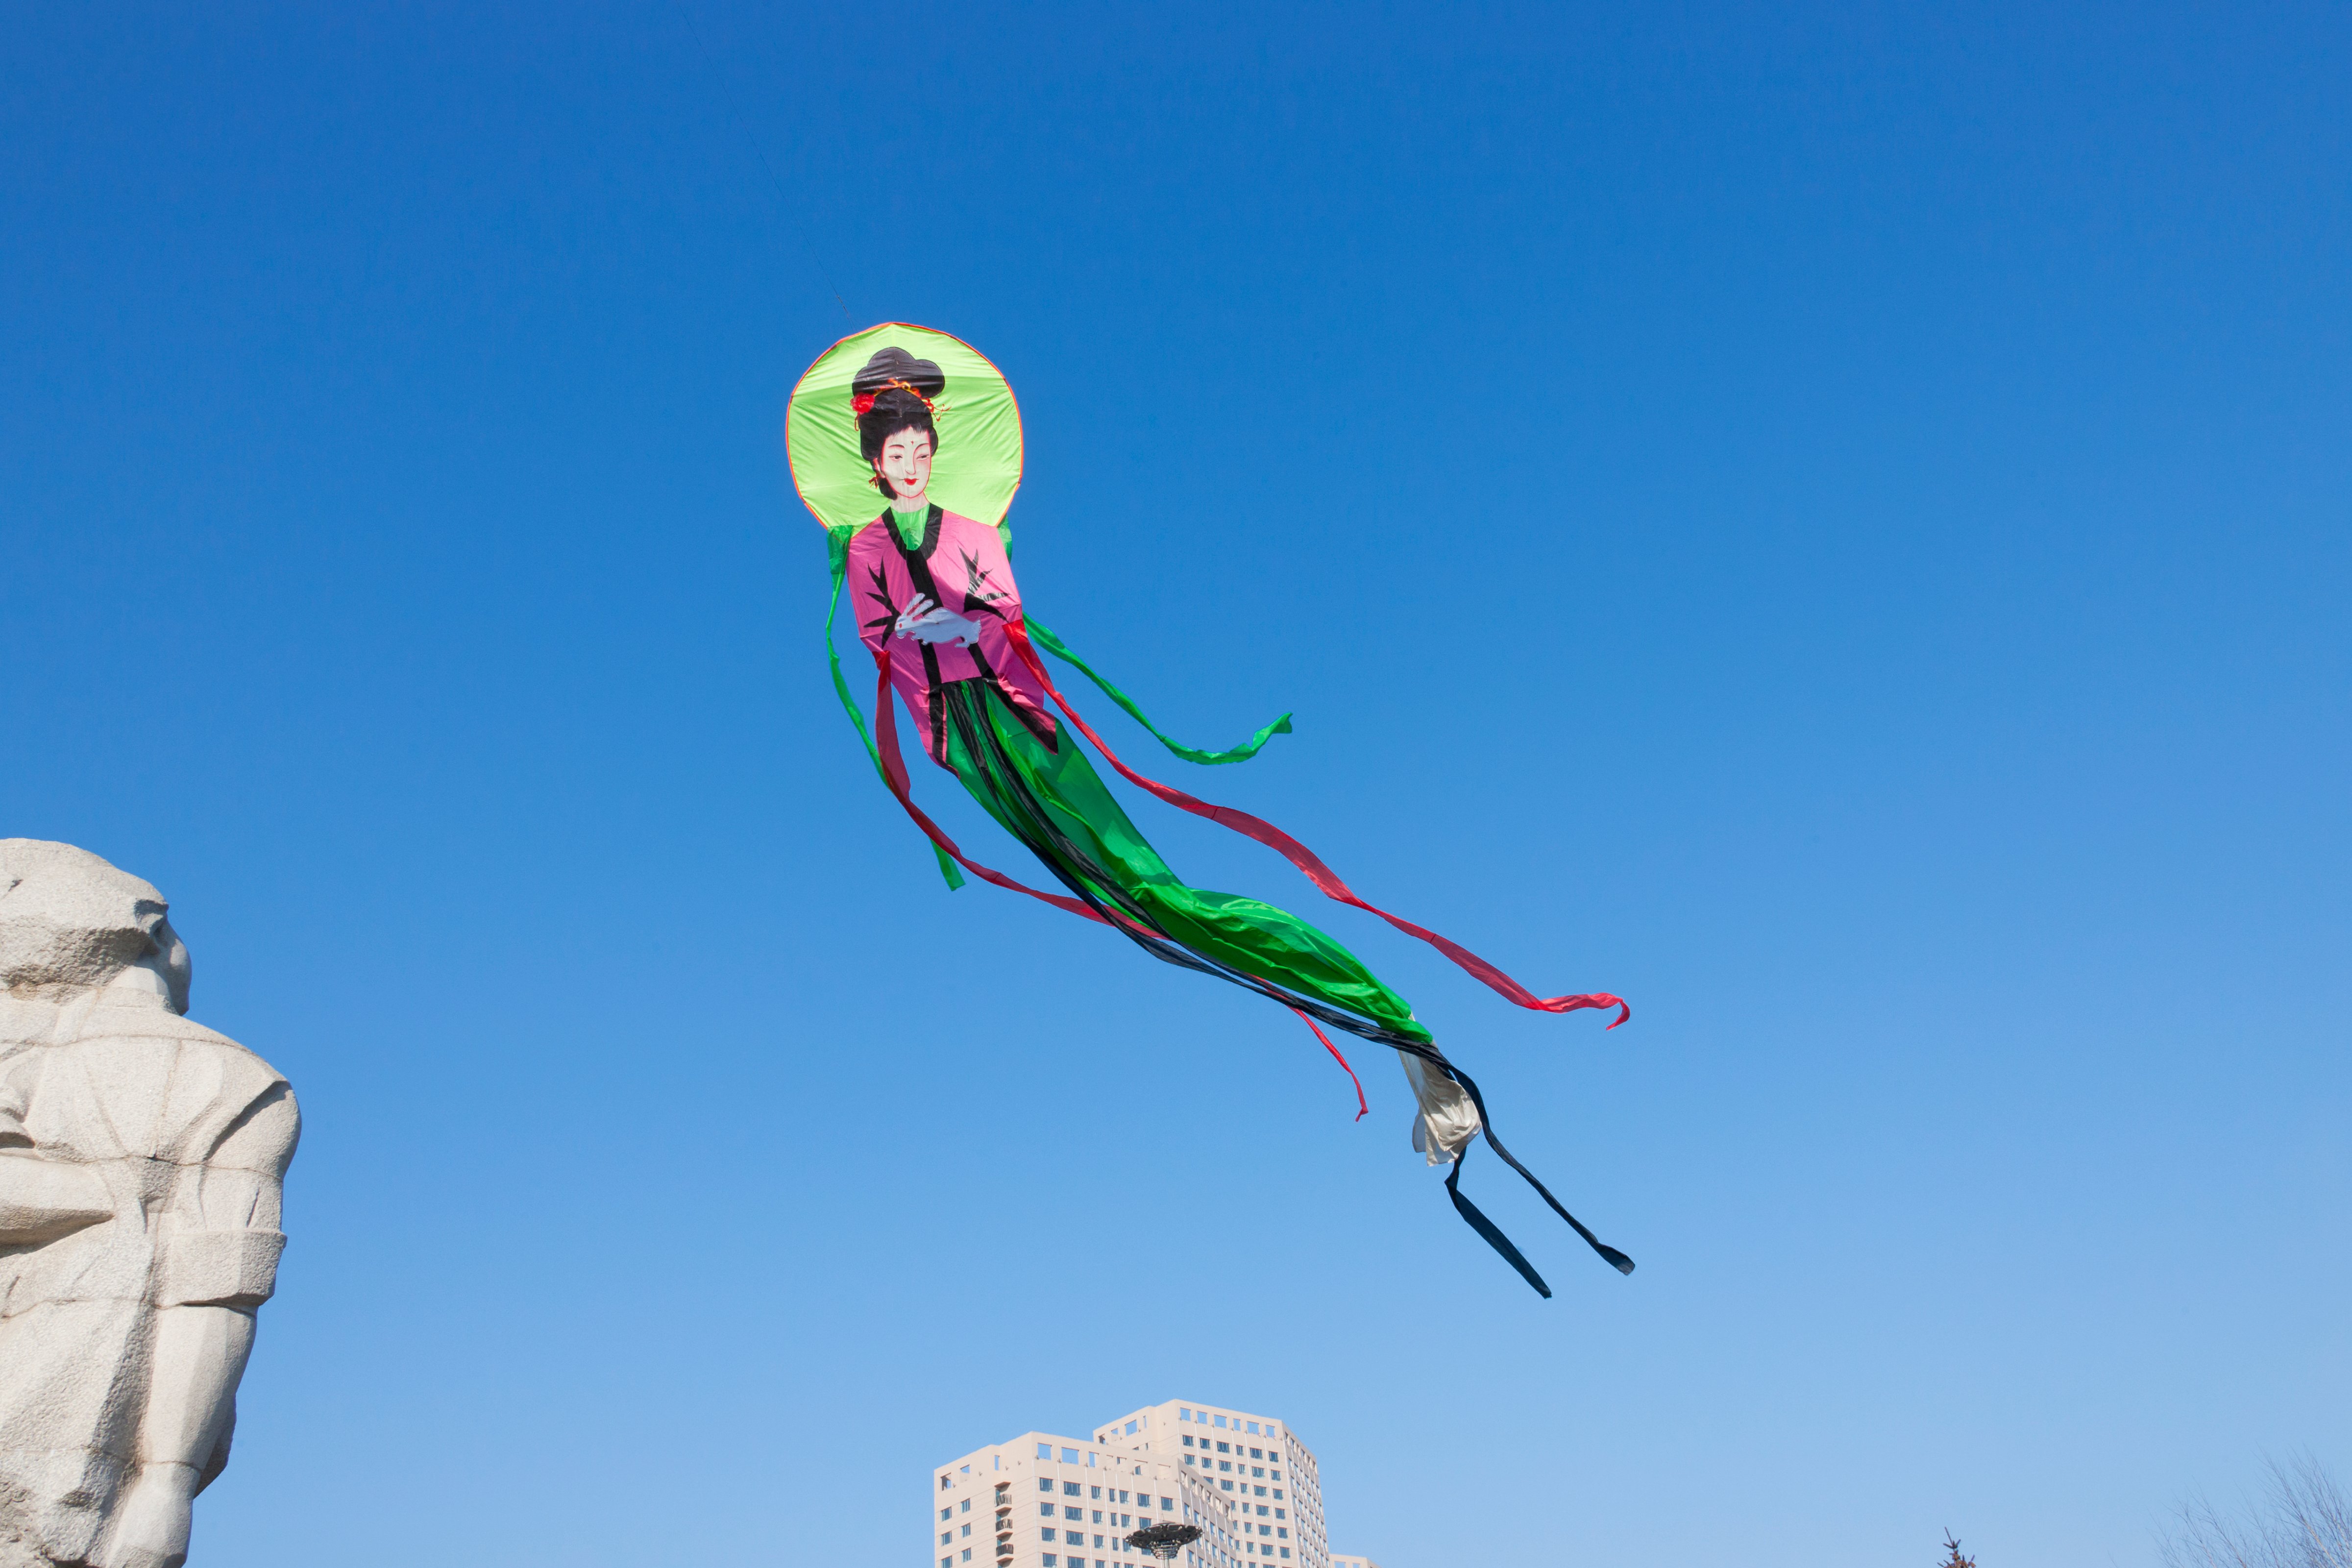 In this undated file photo, a kite of Chang'e, the Chinese moon goddess, flies in Mudanjiang, Heilongjiang province, China (Keren Su—Getty Images/China Span RM)